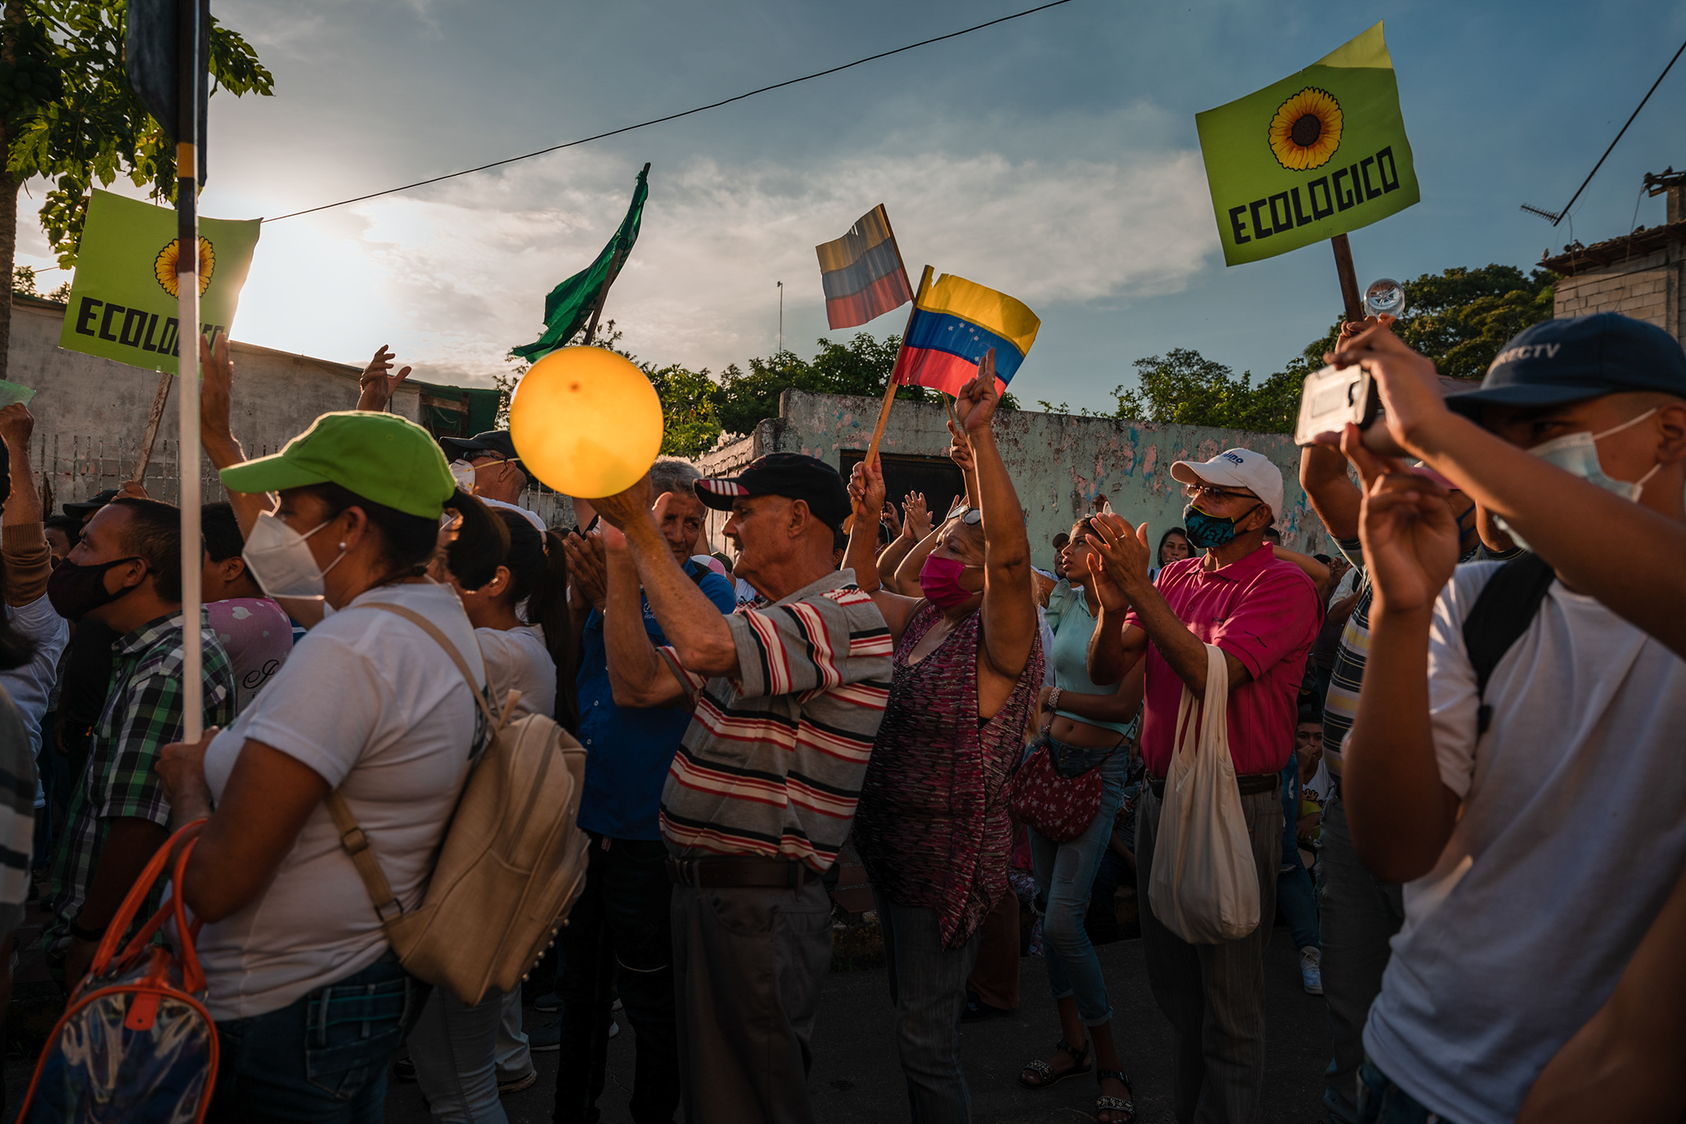 Supporters of Americo De Grazia, an opposition candidate running for the governor's office of Bolivar state, during a speech in El Palmar, Venezuela, Nov. 13, 2021. (Adriana Loureiro Fernandez/The New York Times)